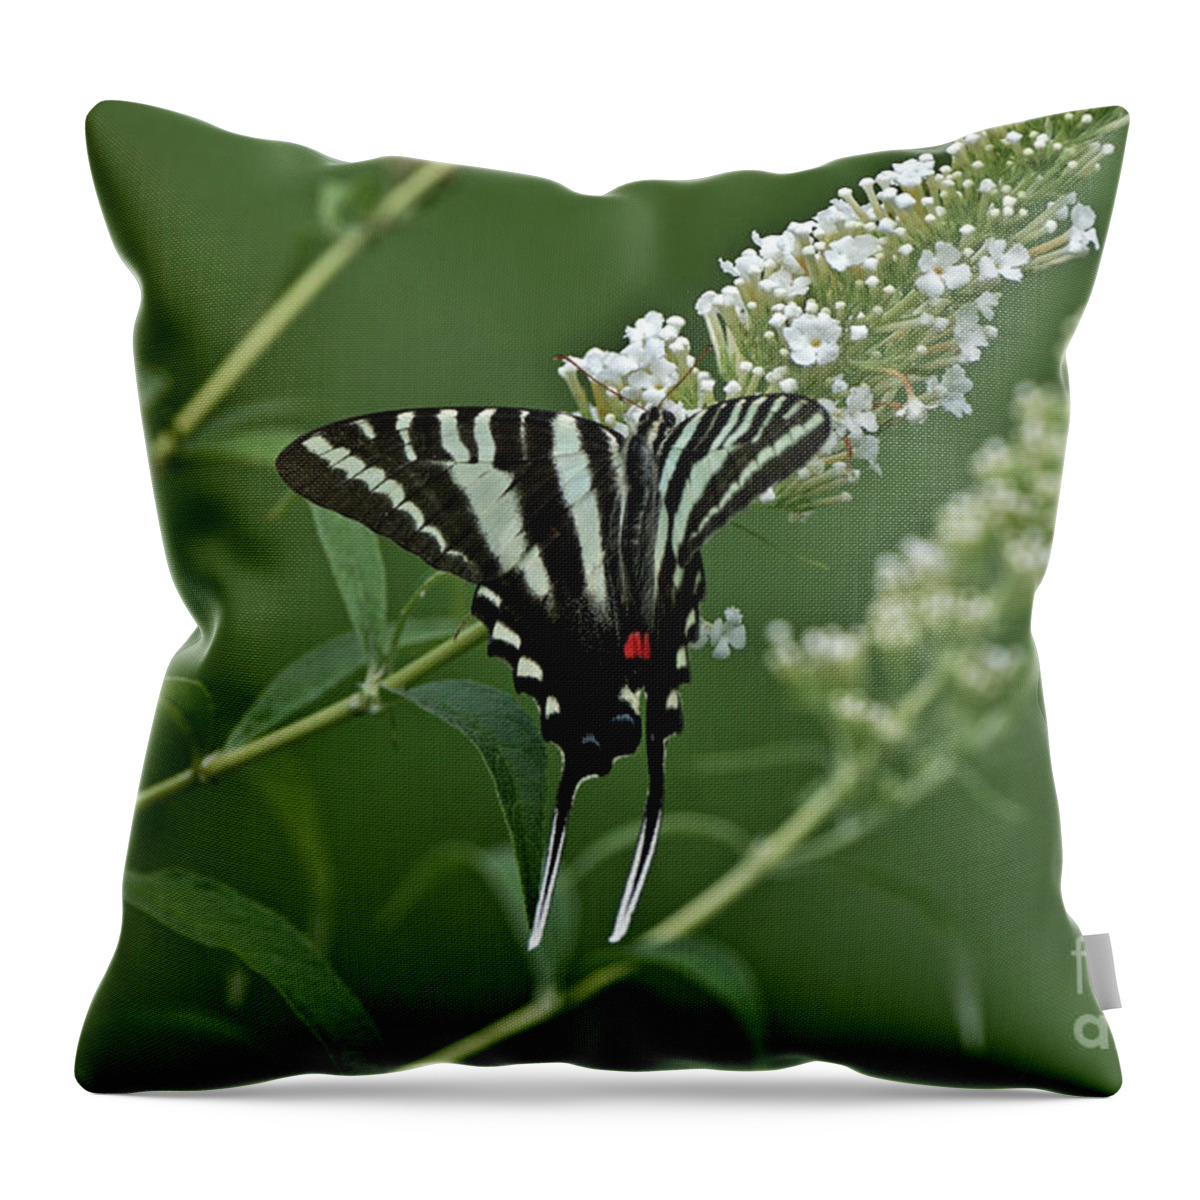 Zebra Swallowtail Throw Pillow featuring the photograph Zebra Swallowtail on Butterfly Bush by Robert E Alter Reflections of Infinity